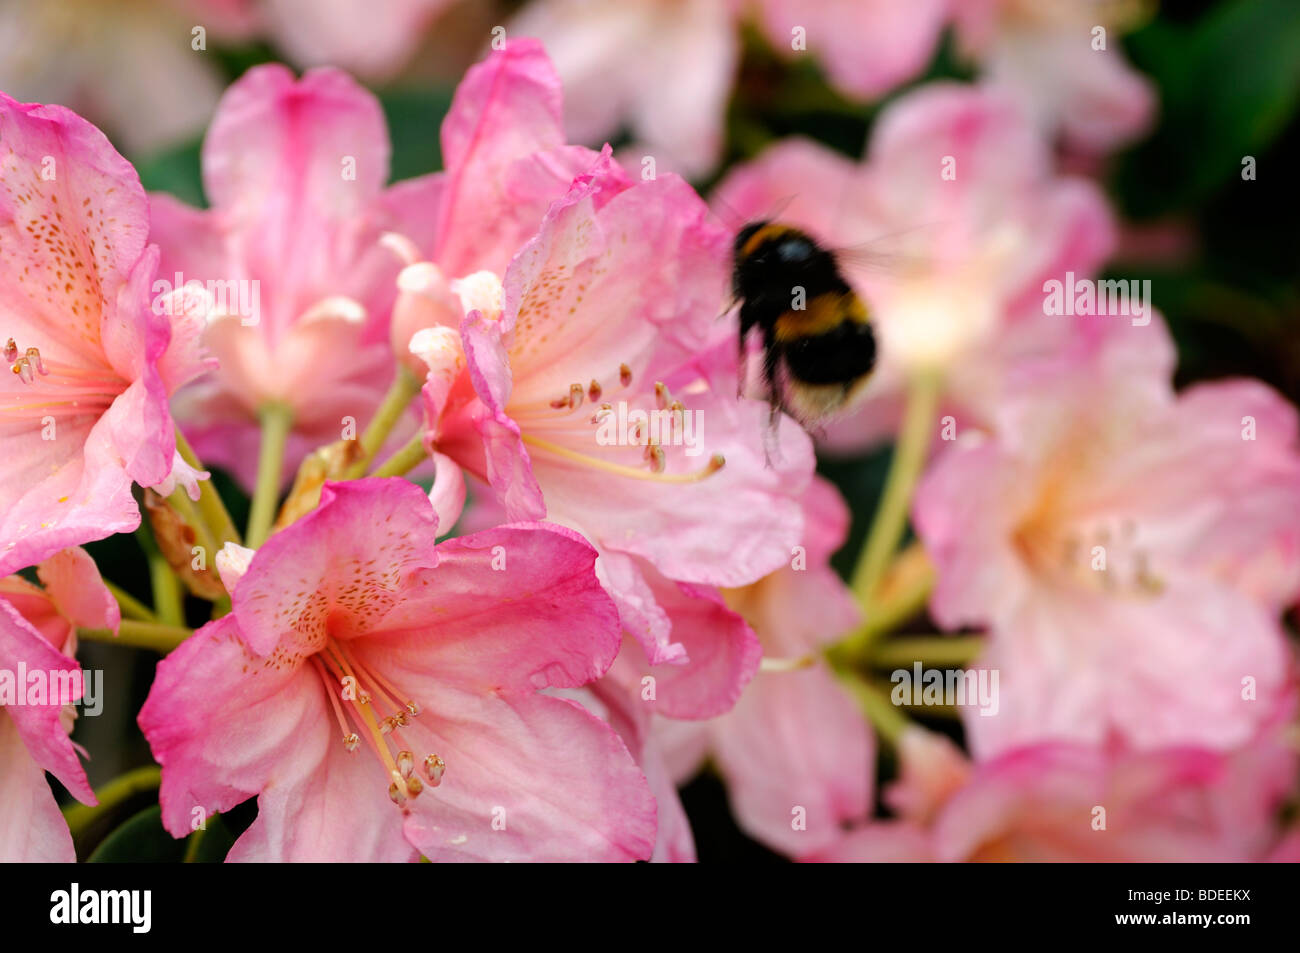 bumble bee flying off a pink hybrid rhododendron blossom early spring Stock Photo